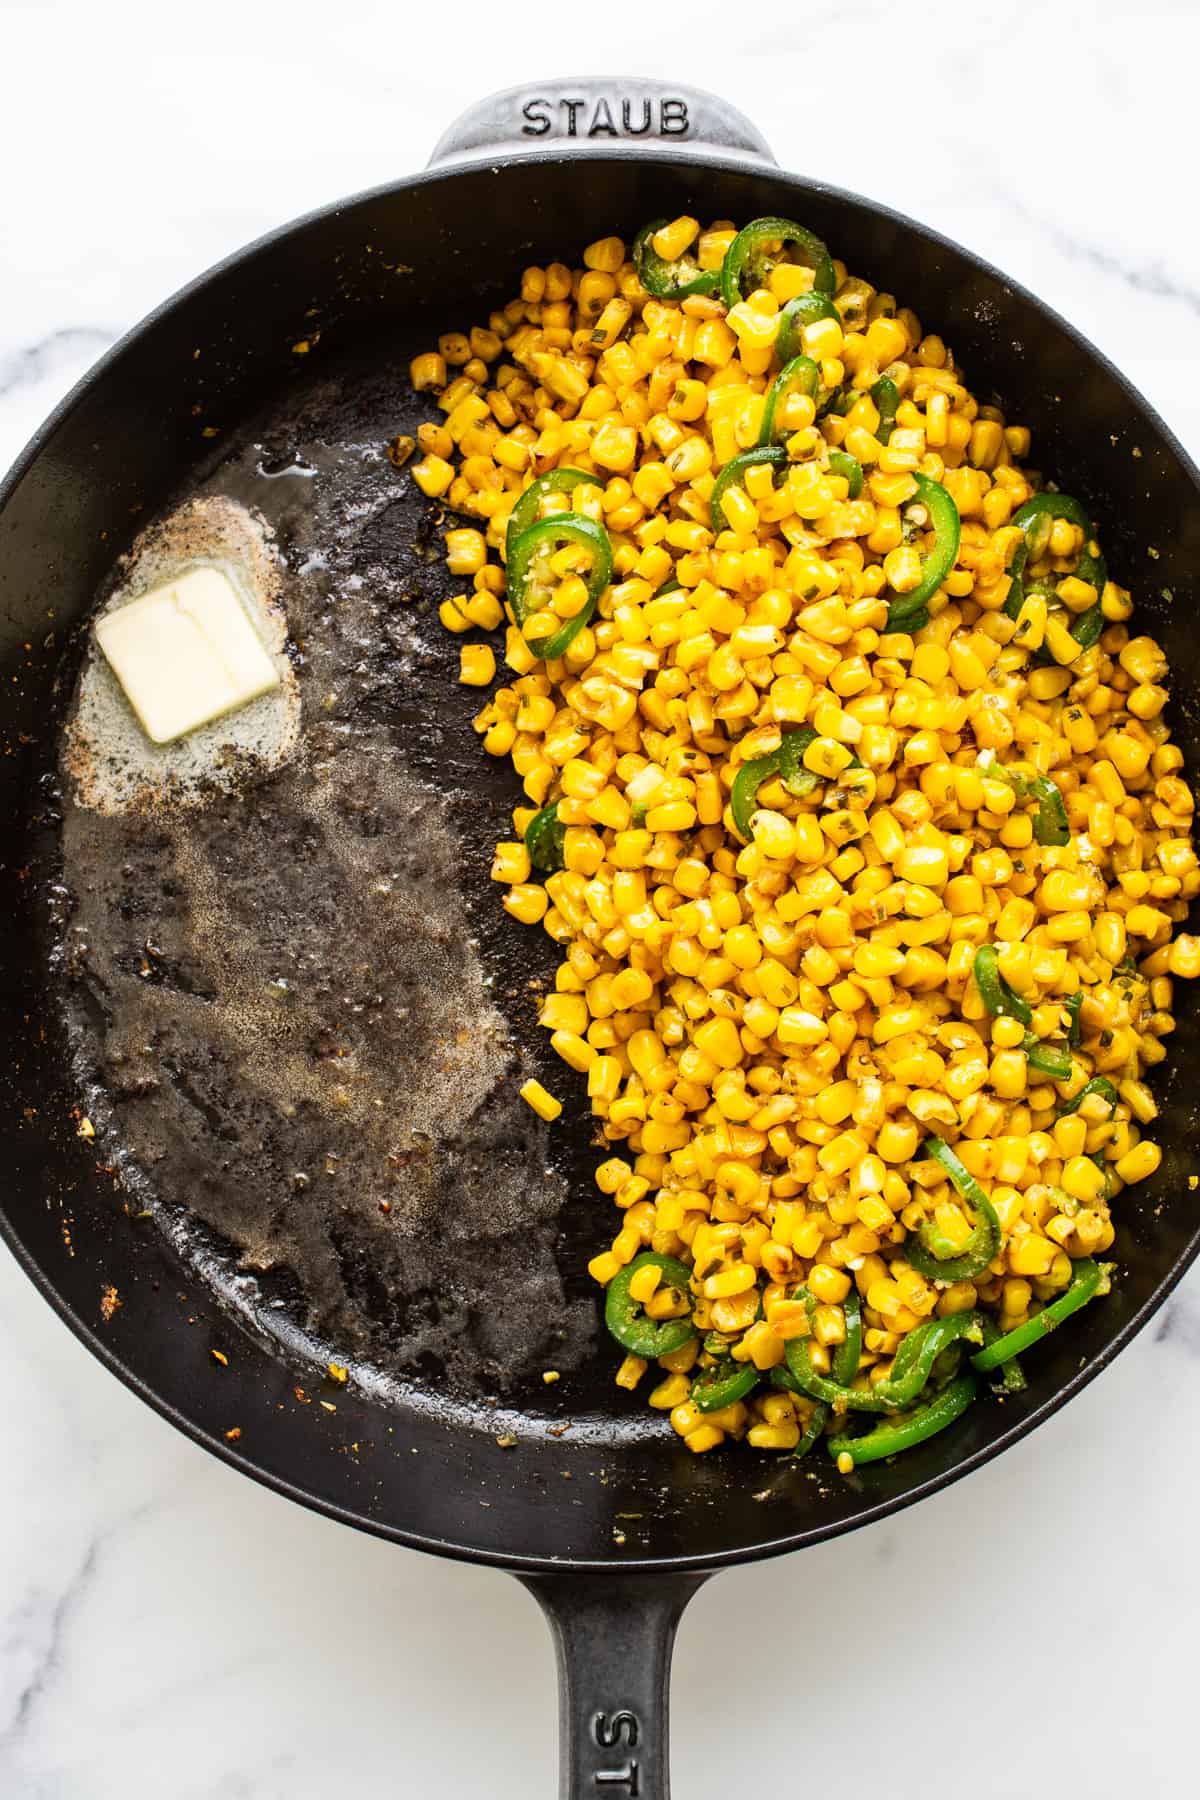 Corn and sliced jalapenos in a cast iron skillet with a pad of melting butter.